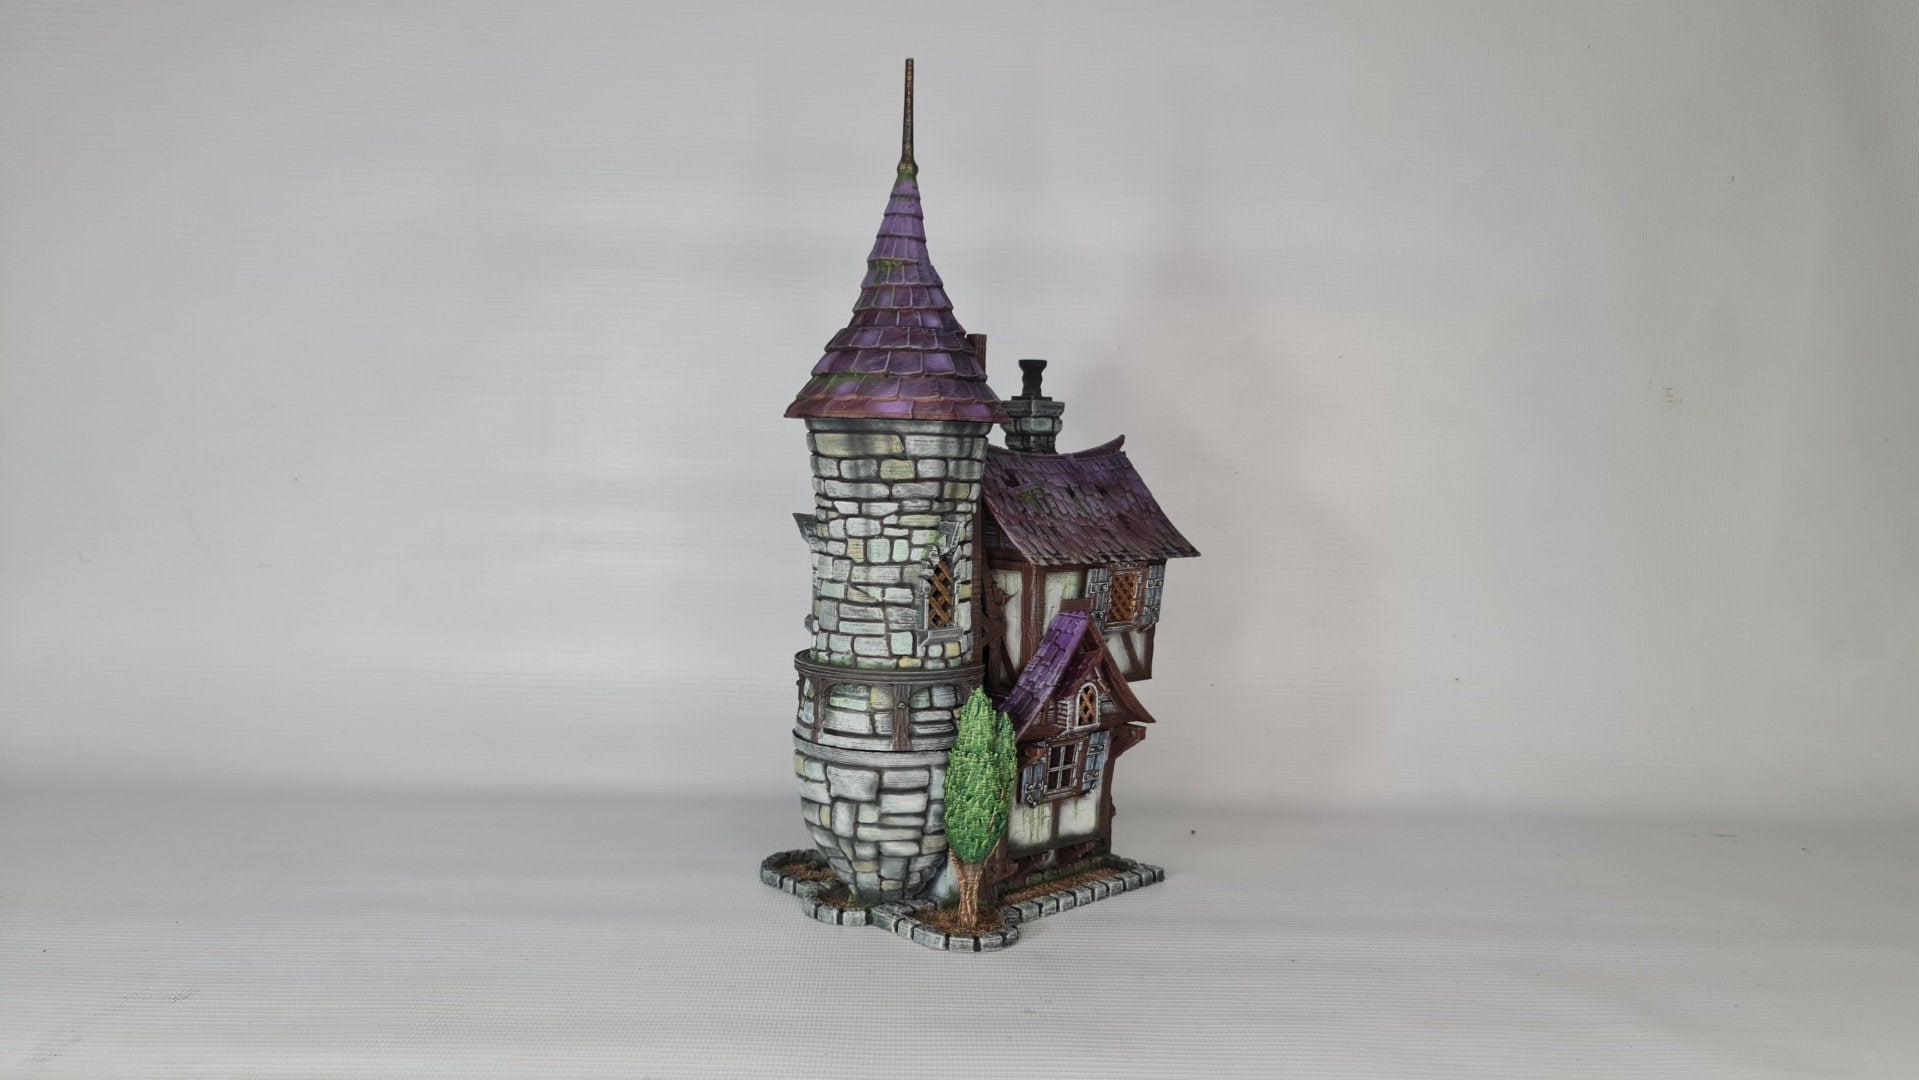 Peppermill Cottage - 3DP4U Medieval Town | Miniature | Wargaming | Roleplaying Games | 32mm | Inn | House | Playable | Filament | 3d printed